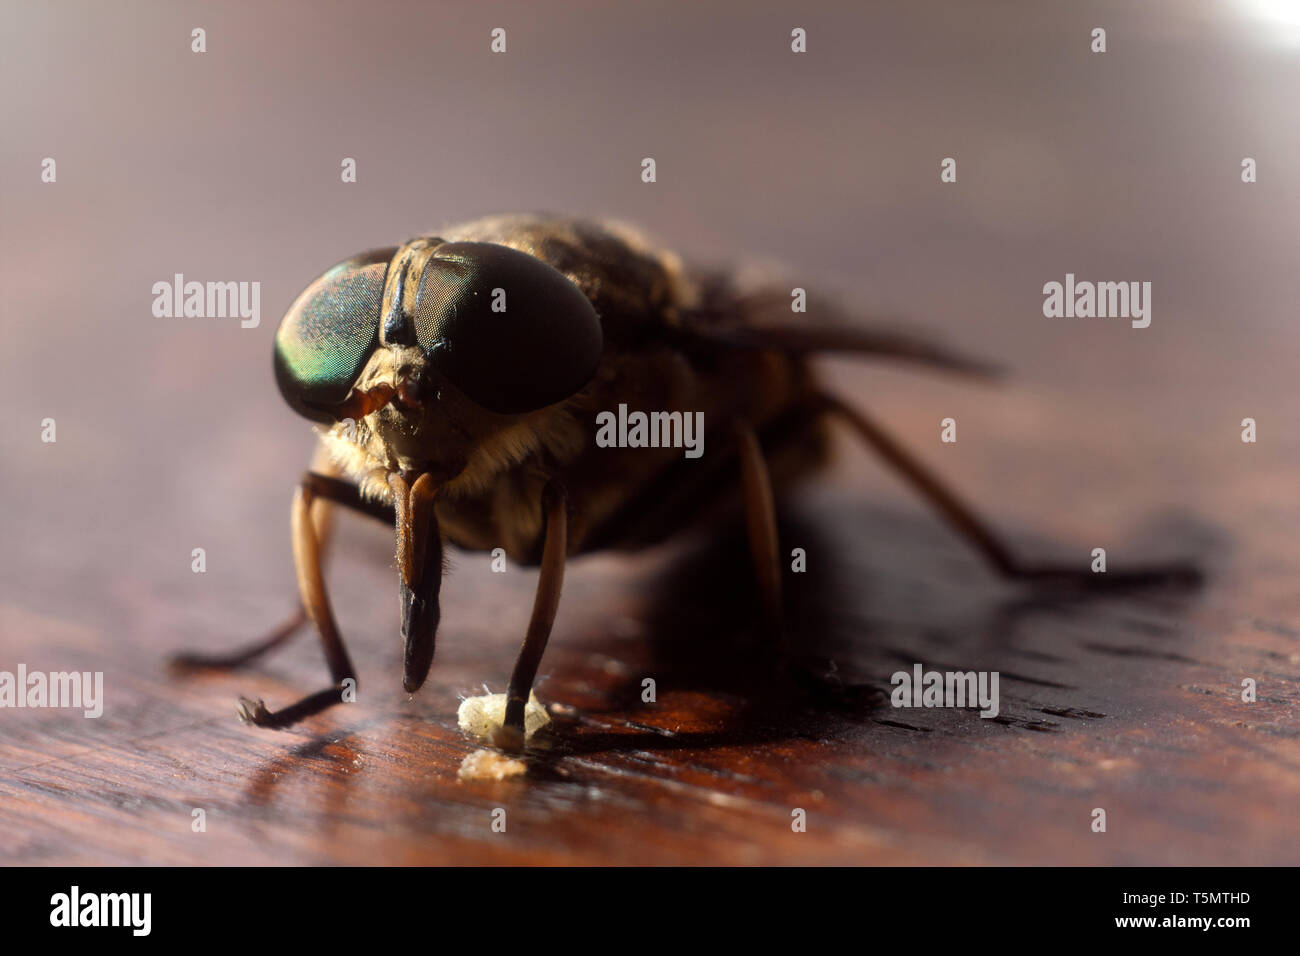 Fly on wood brown sruface - Extreme magnification Stock Photo